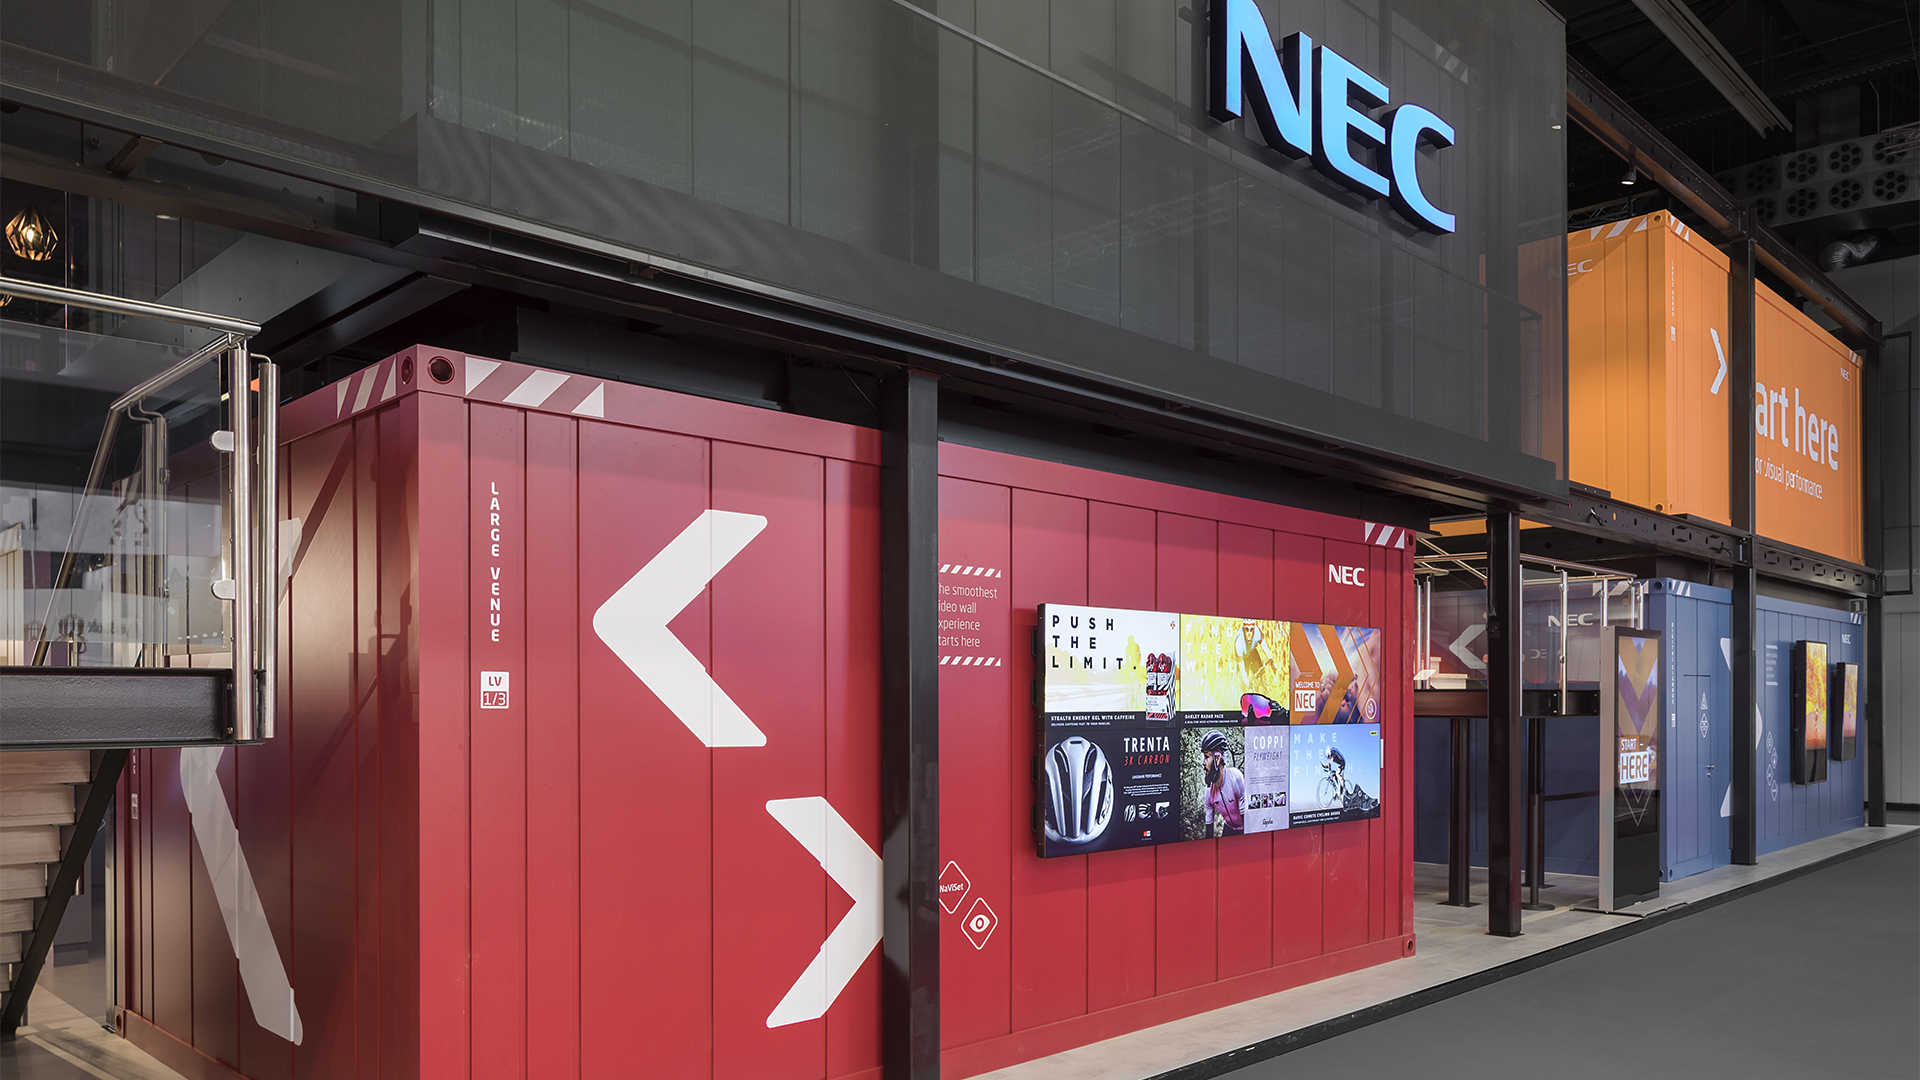 Dart stages the NEC fair stand at the ISE 2019